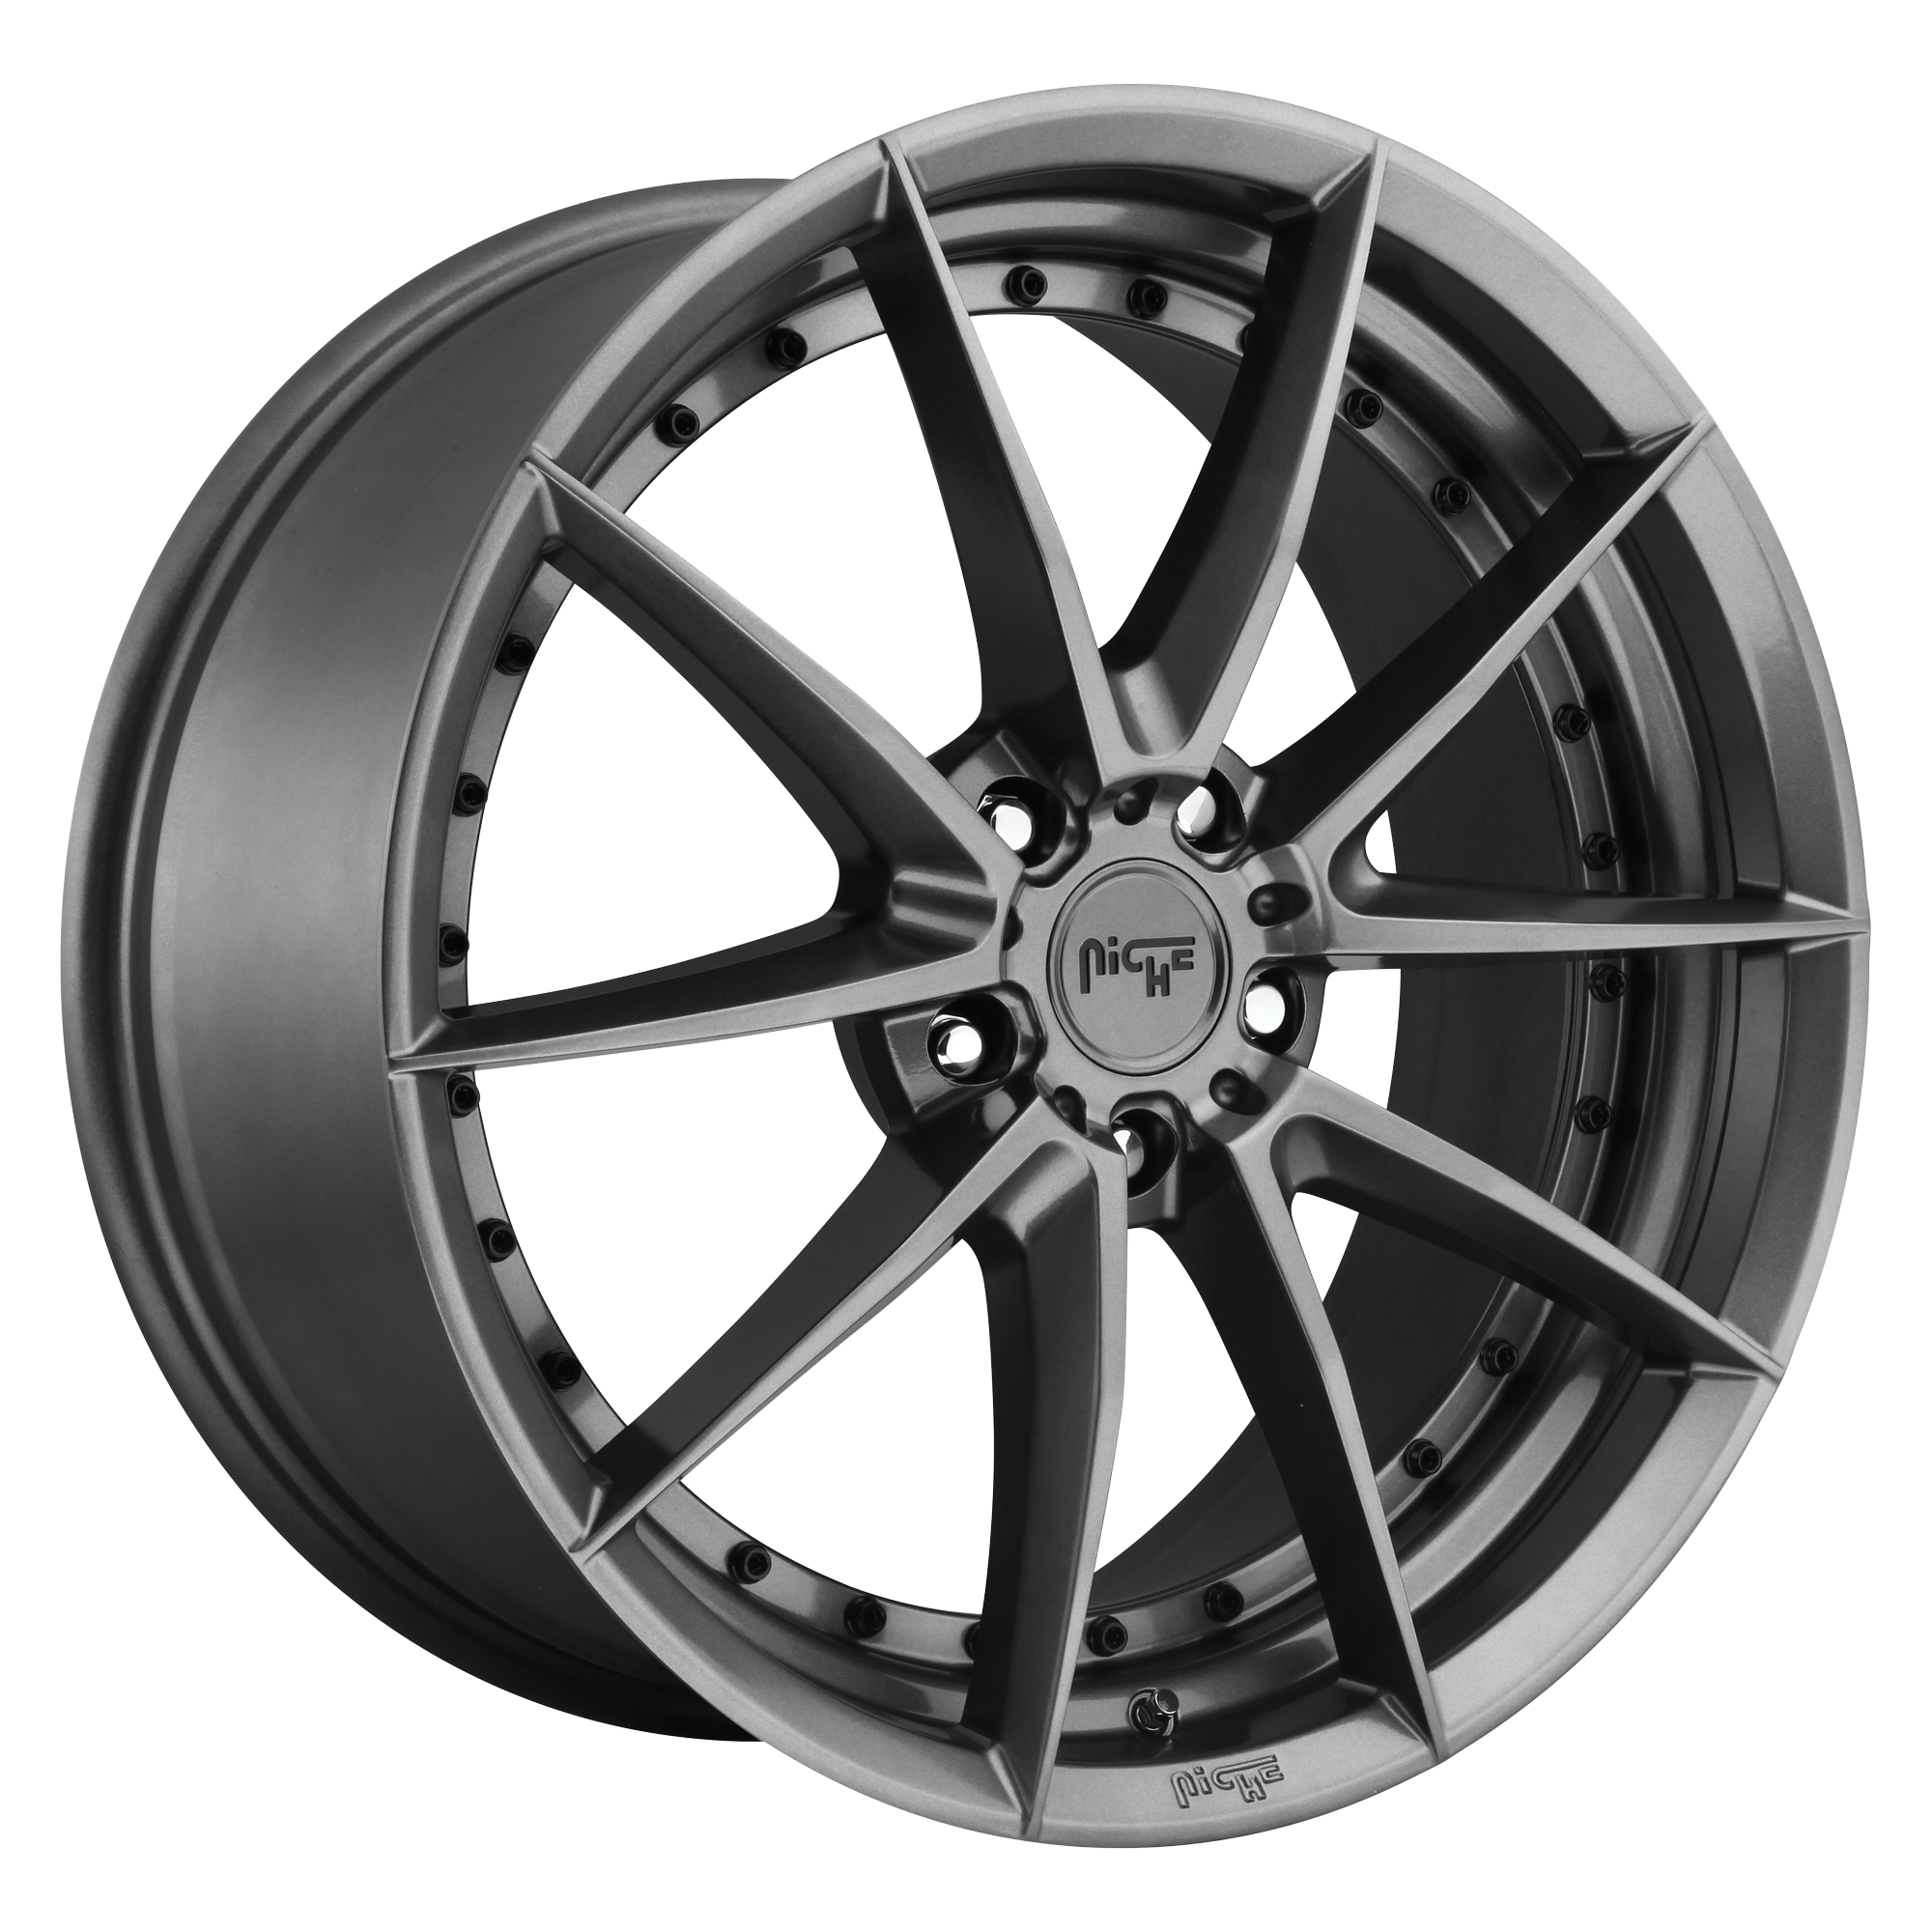 SECTOR 20x10.5 5x112.00 GLOSS ANTHRACITE (40 mm) - Tires and Engine Performance